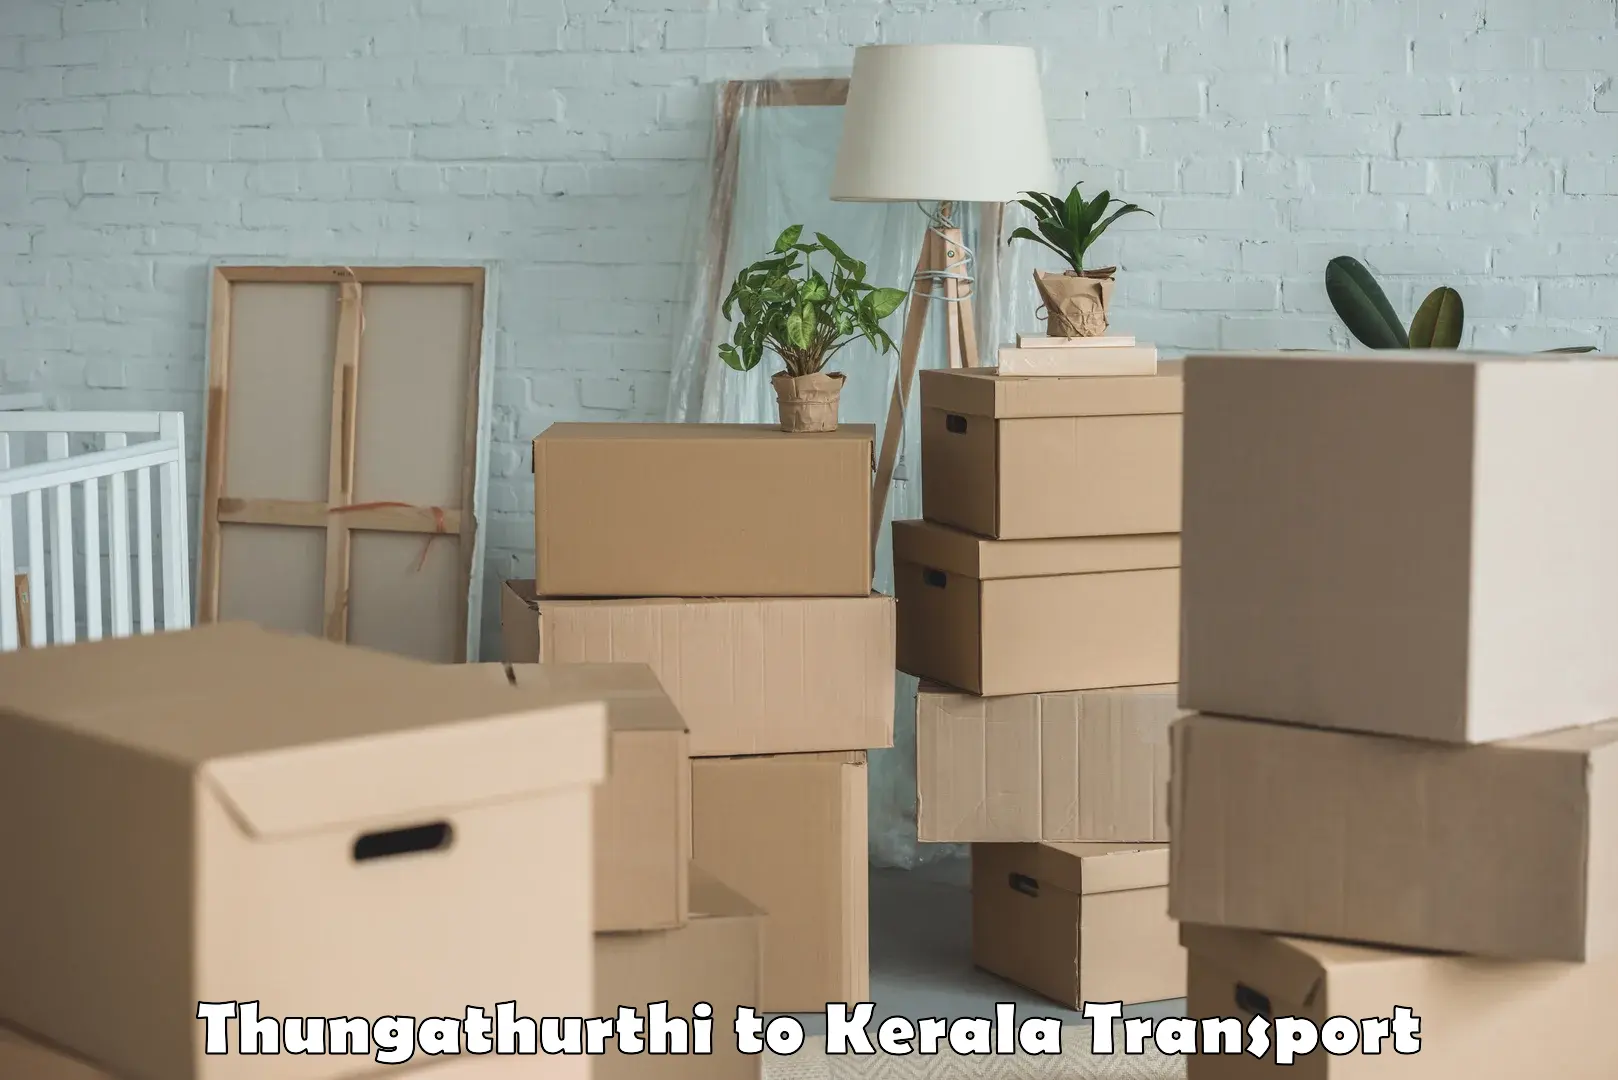 Commercial transport service Thungathurthi to Chalakudy